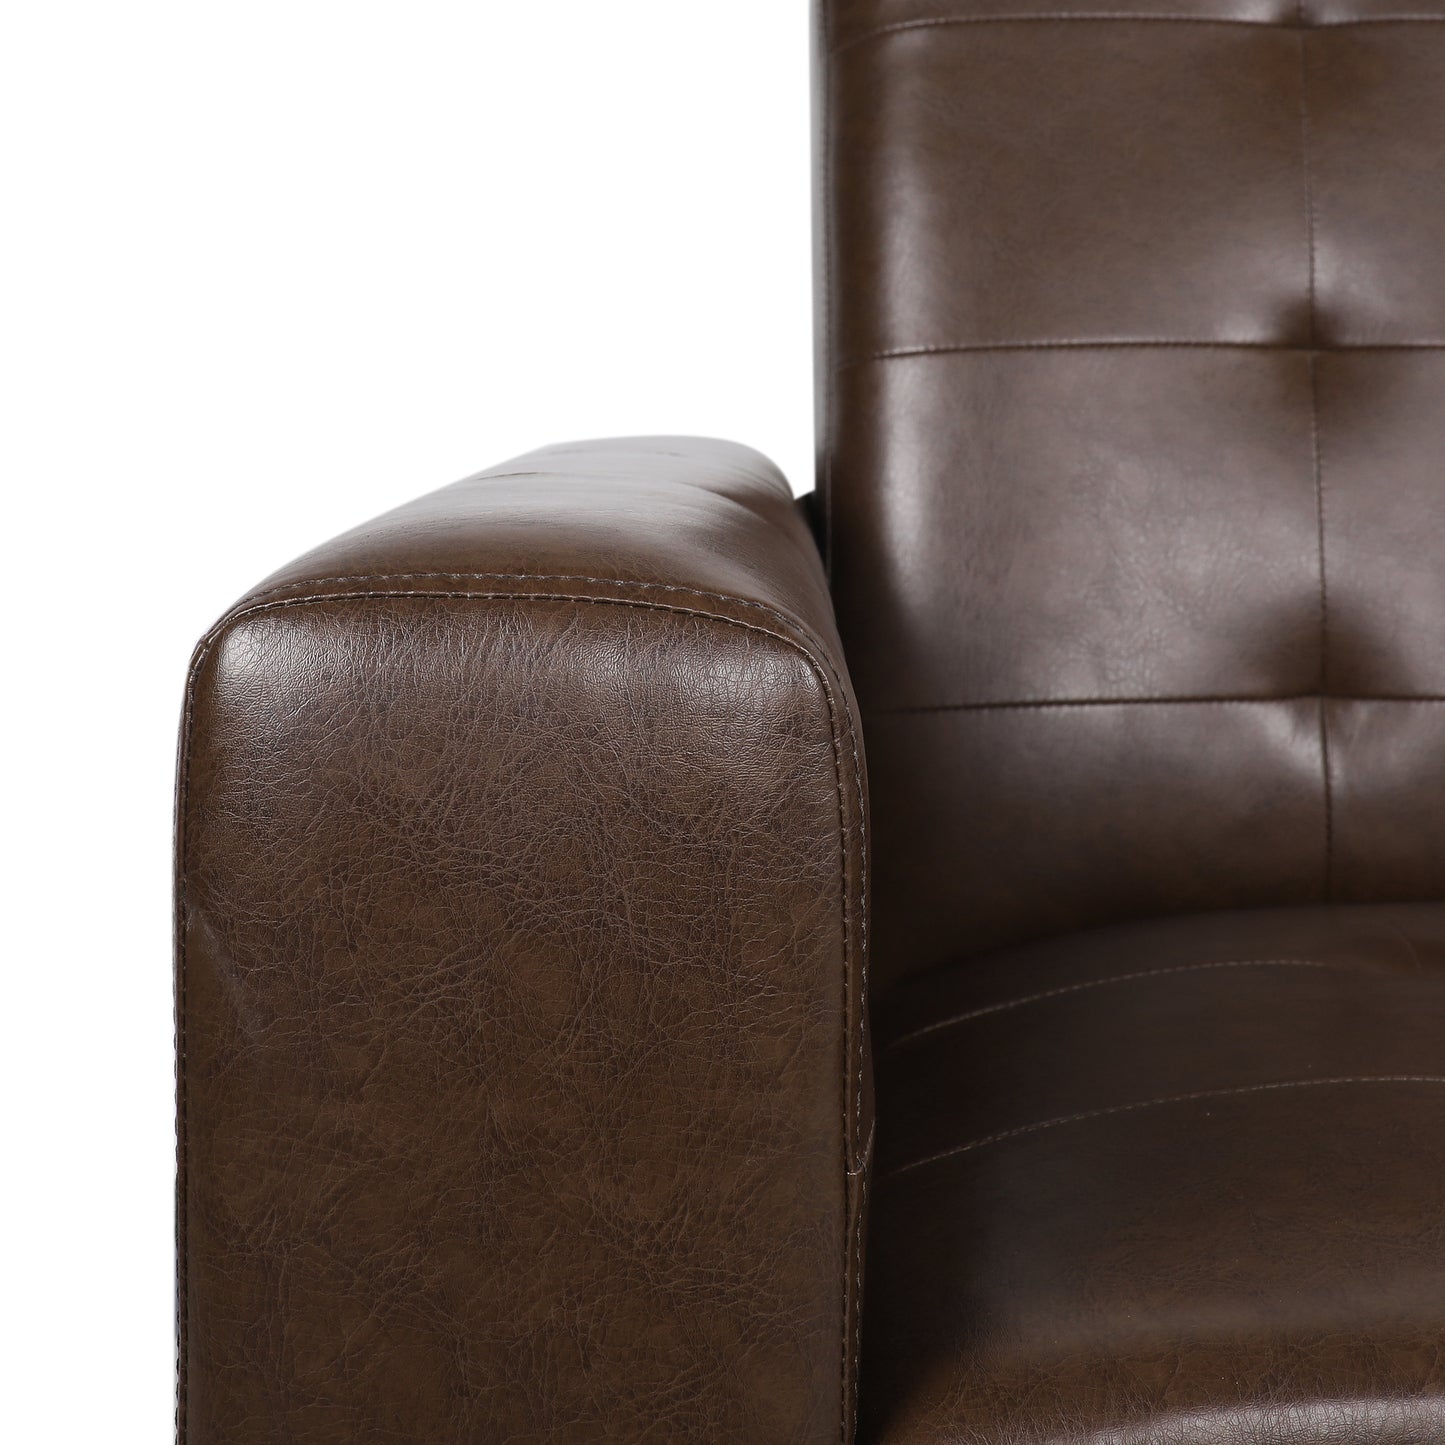 Langseth Contemporary Tufted Pushback Recliner